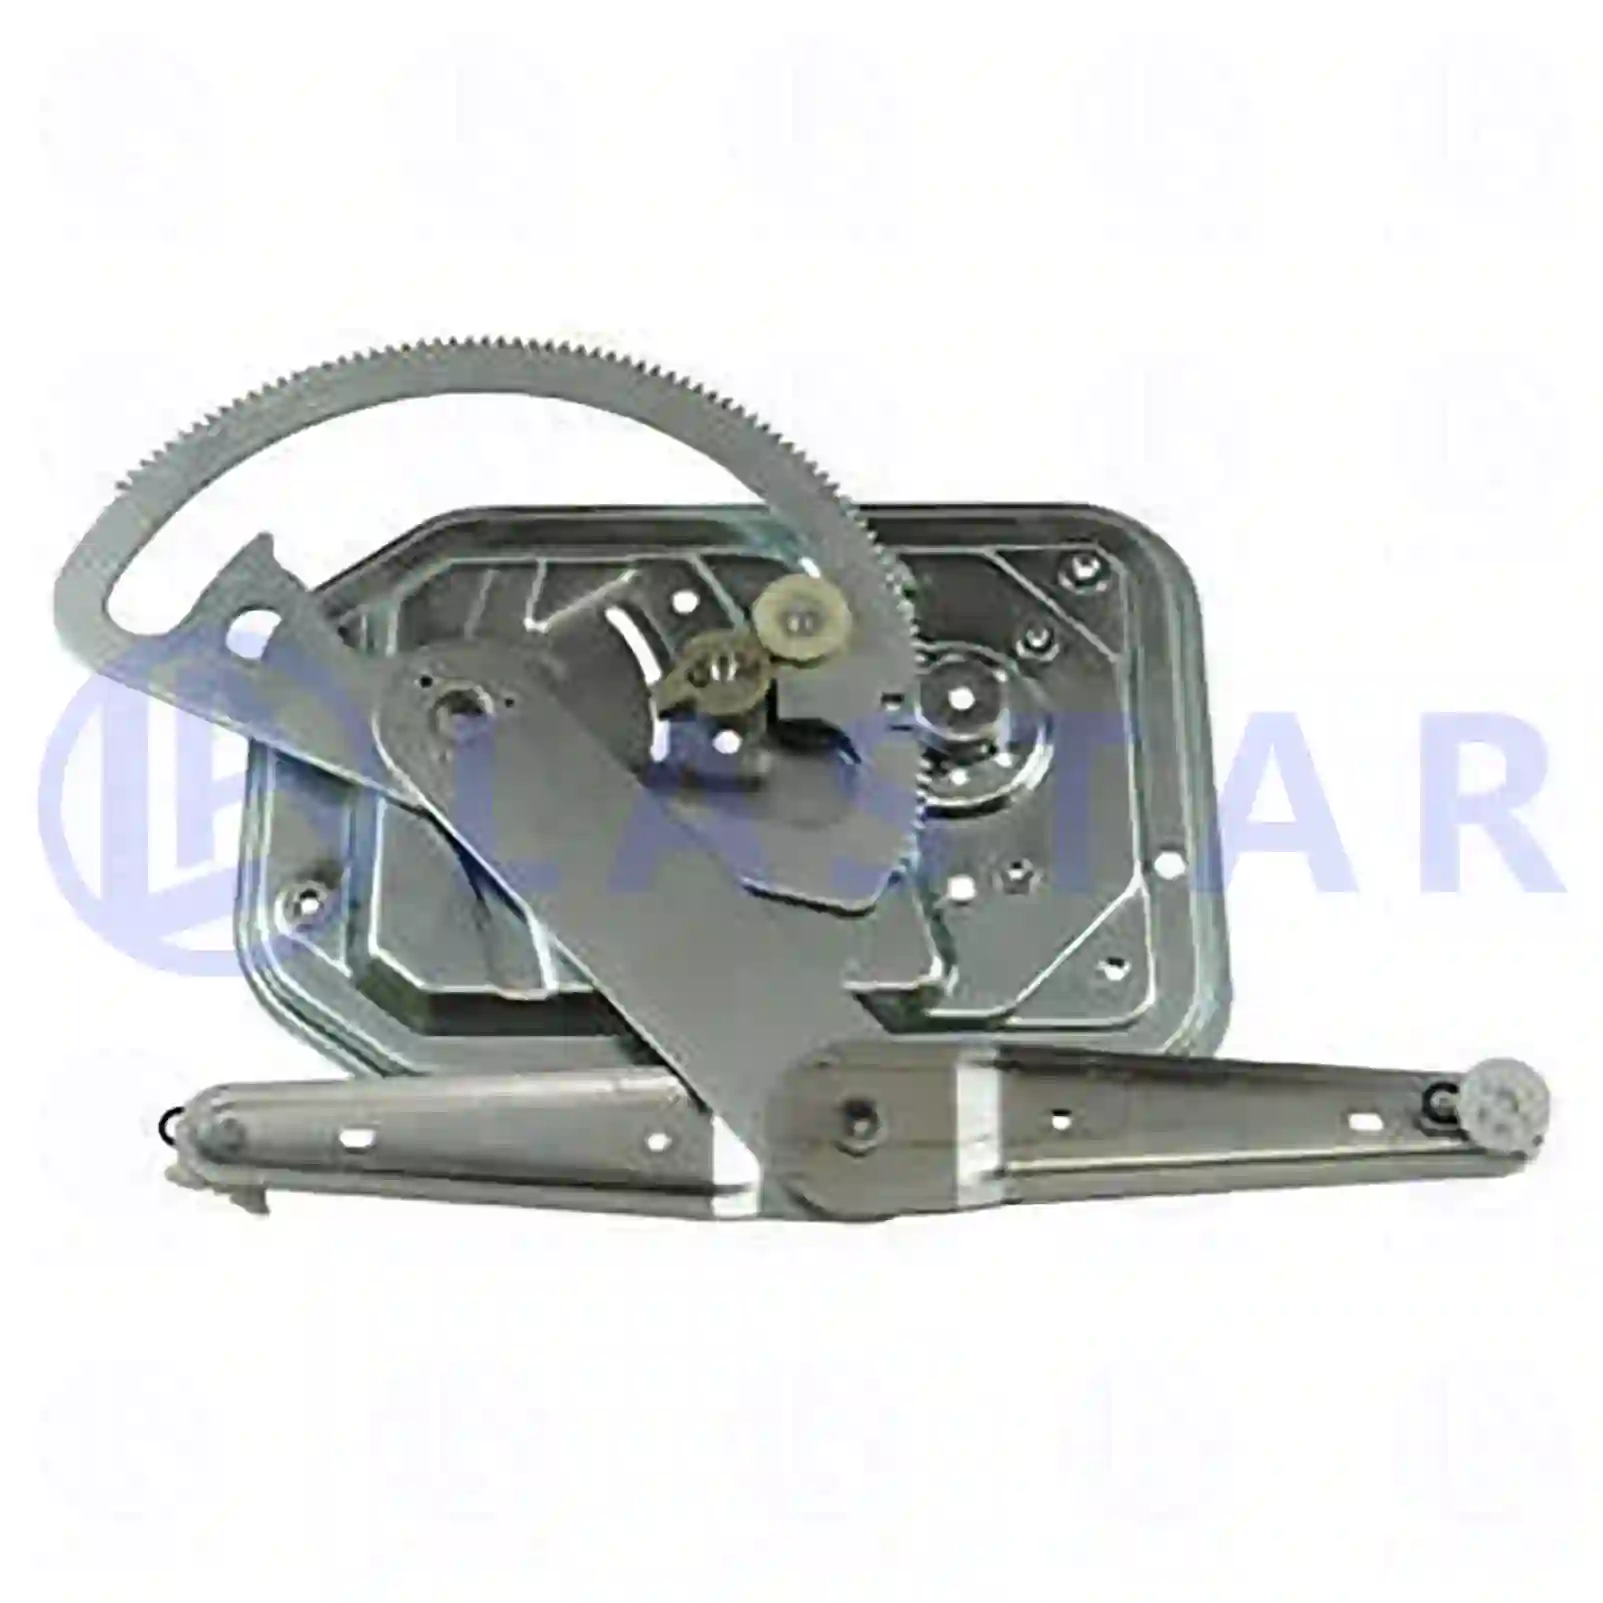 Window regulator, right, electrical, with motor, 77721479, 1366840, 1366850, 1442295, 2162367, 2303352, 2572351, ZG61315-0008 ||  77721479 Lastar Spare Part | Truck Spare Parts, Auotomotive Spare Parts Window regulator, right, electrical, with motor, 77721479, 1366840, 1366850, 1442295, 2162367, 2303352, 2572351, ZG61315-0008 ||  77721479 Lastar Spare Part | Truck Spare Parts, Auotomotive Spare Parts